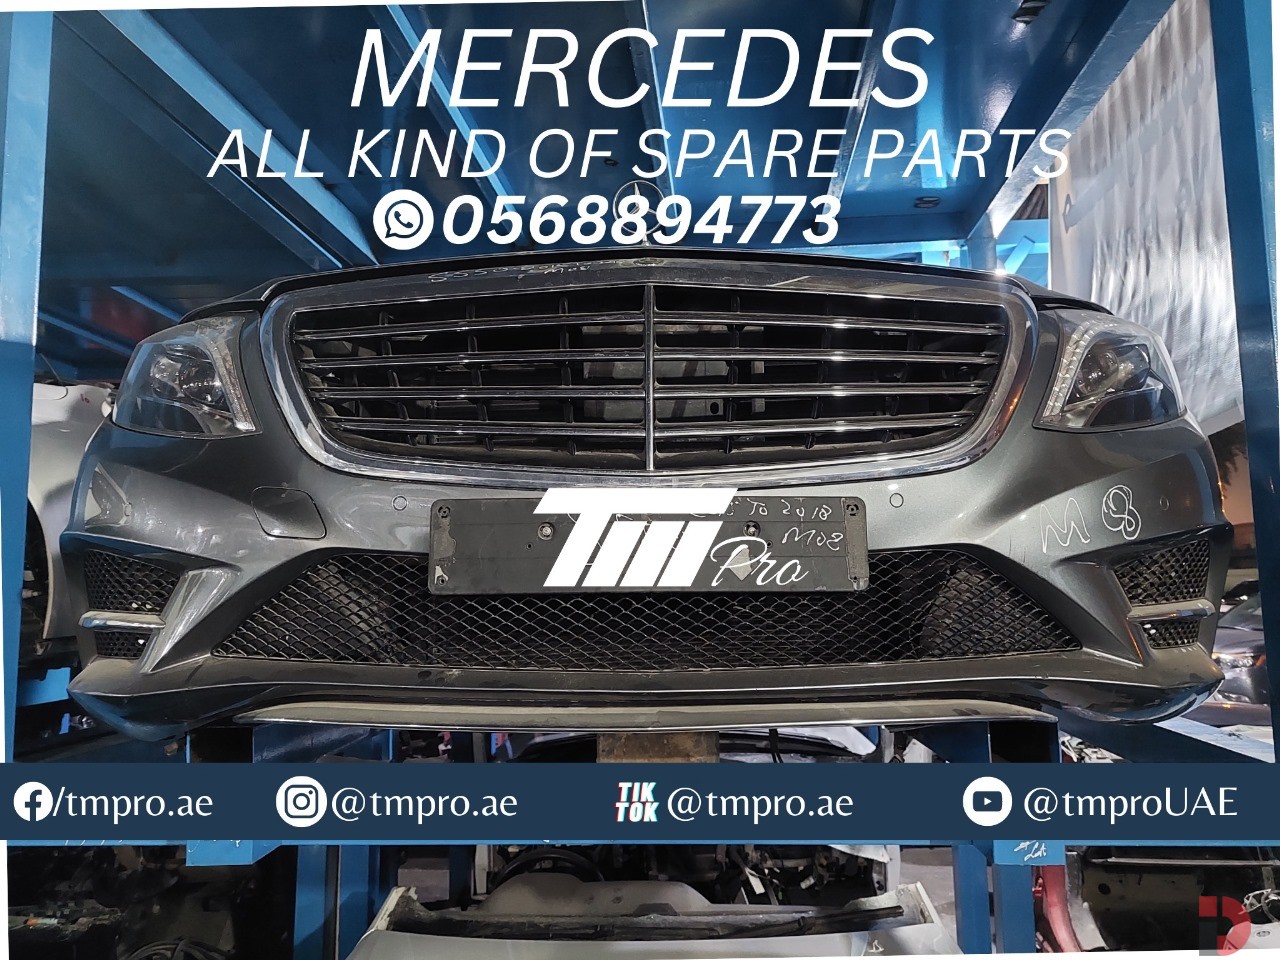 All kinds of new and used spare parts for Mercedes available. Delivery